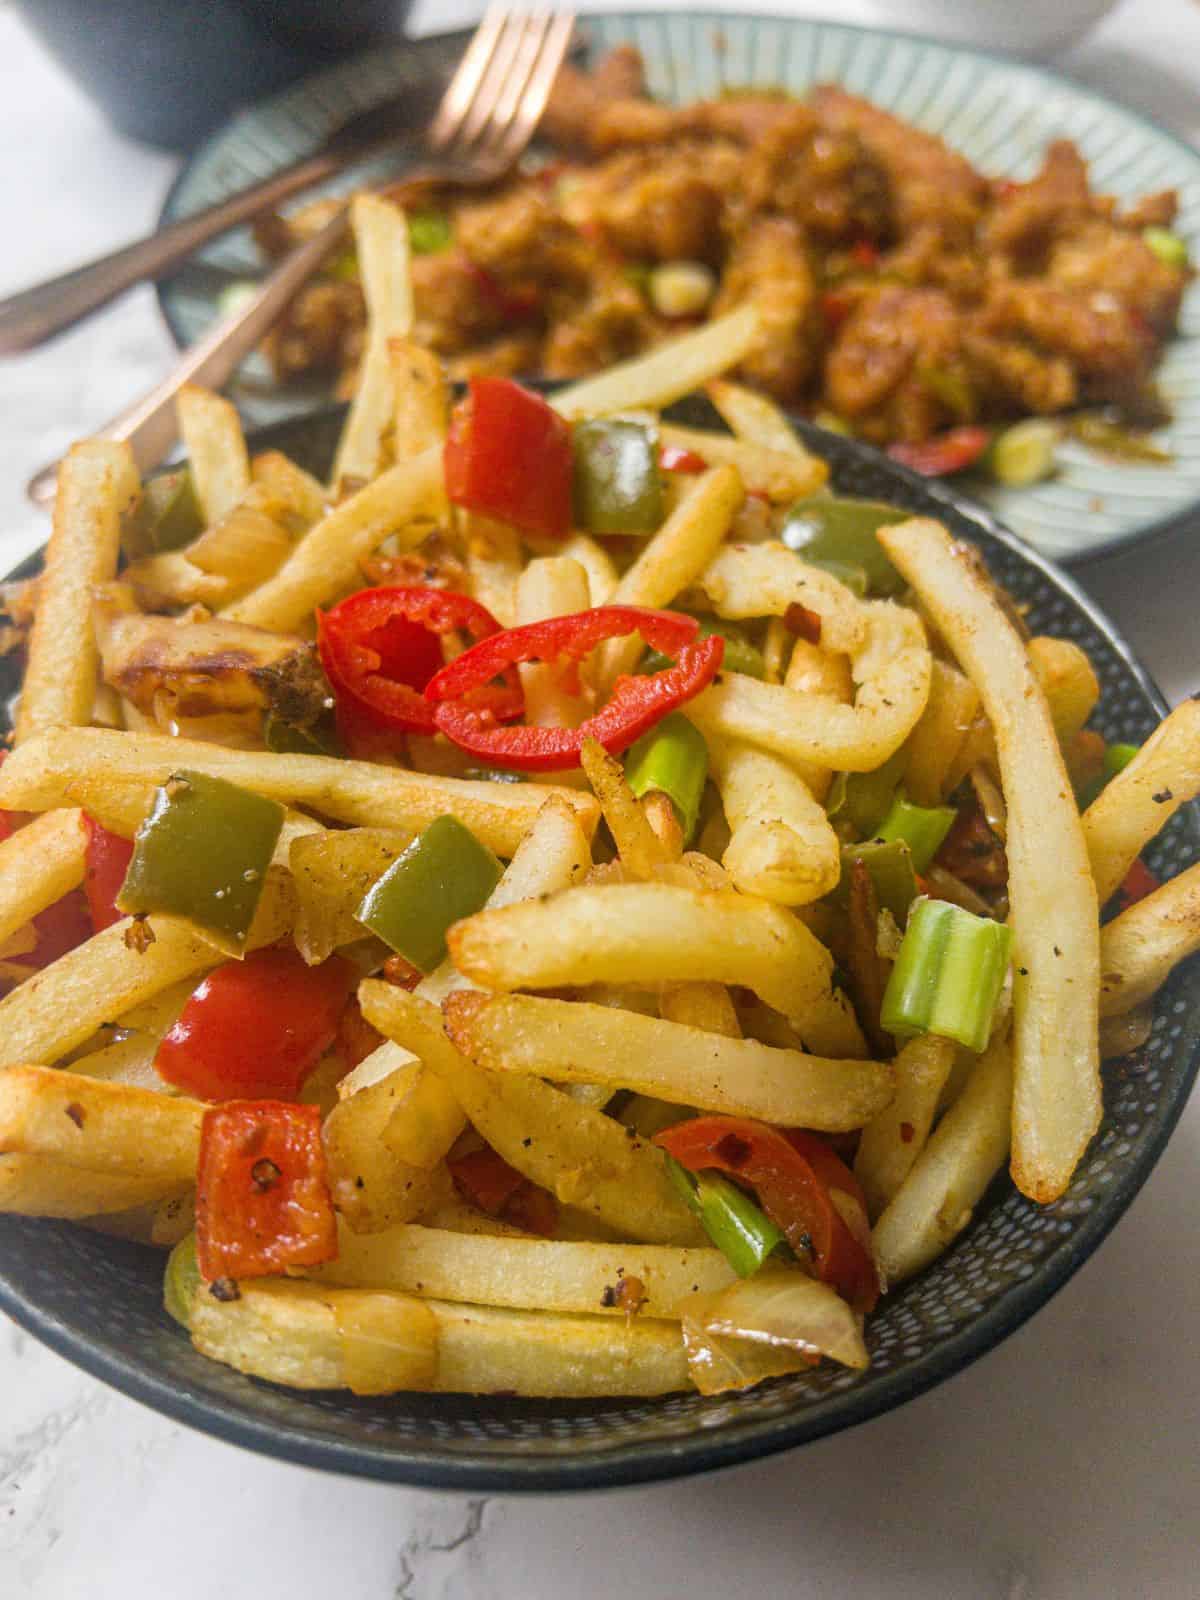 a bowl of fries garnished with chilli, red and green pepper, with a chinese crispy chilli dish in the background.